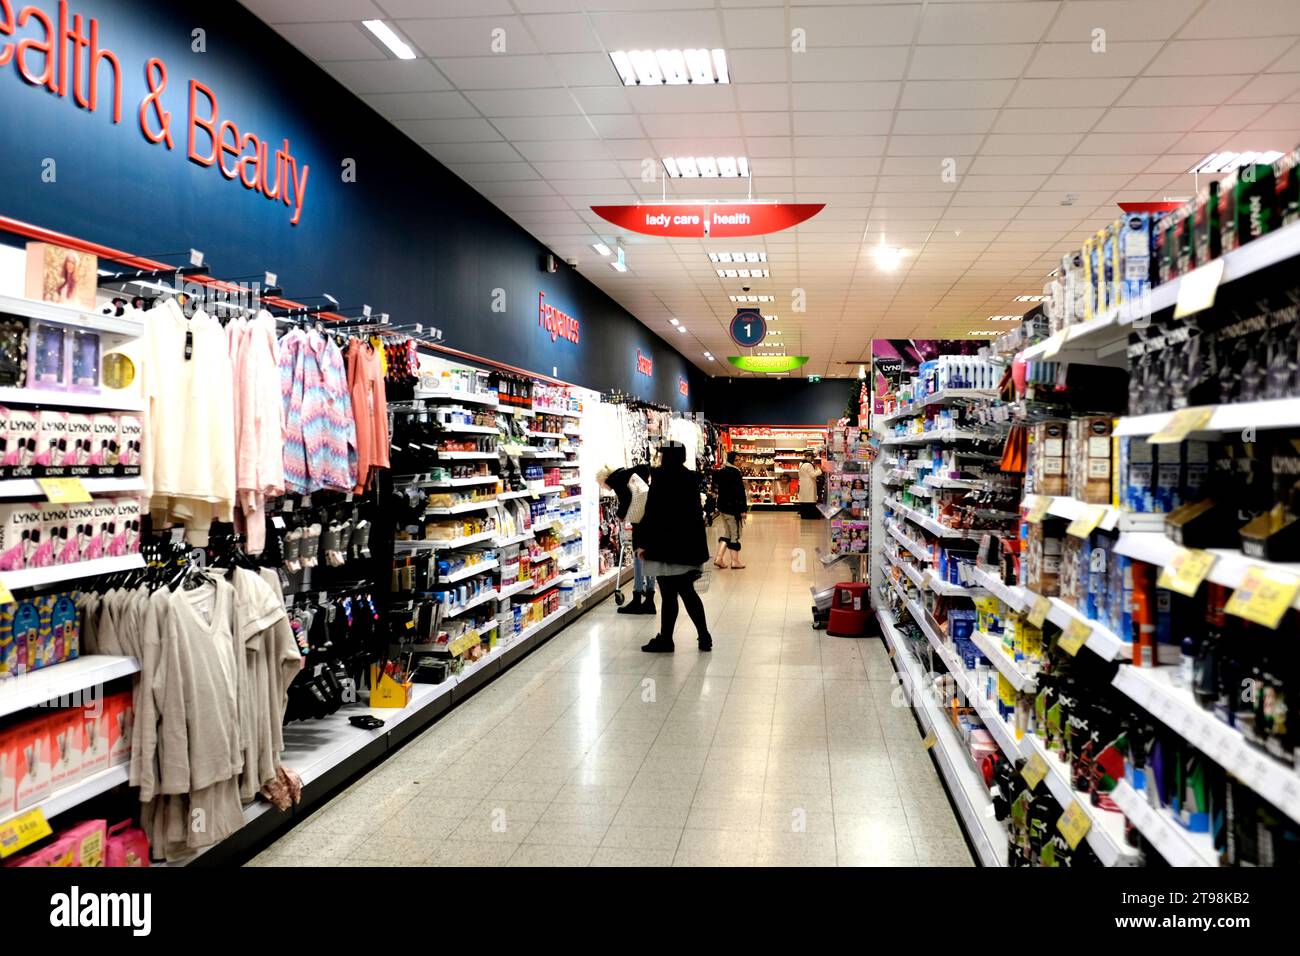 home bargains retail supermarket in boorman way,whitstable,kent,uk Stock Photo